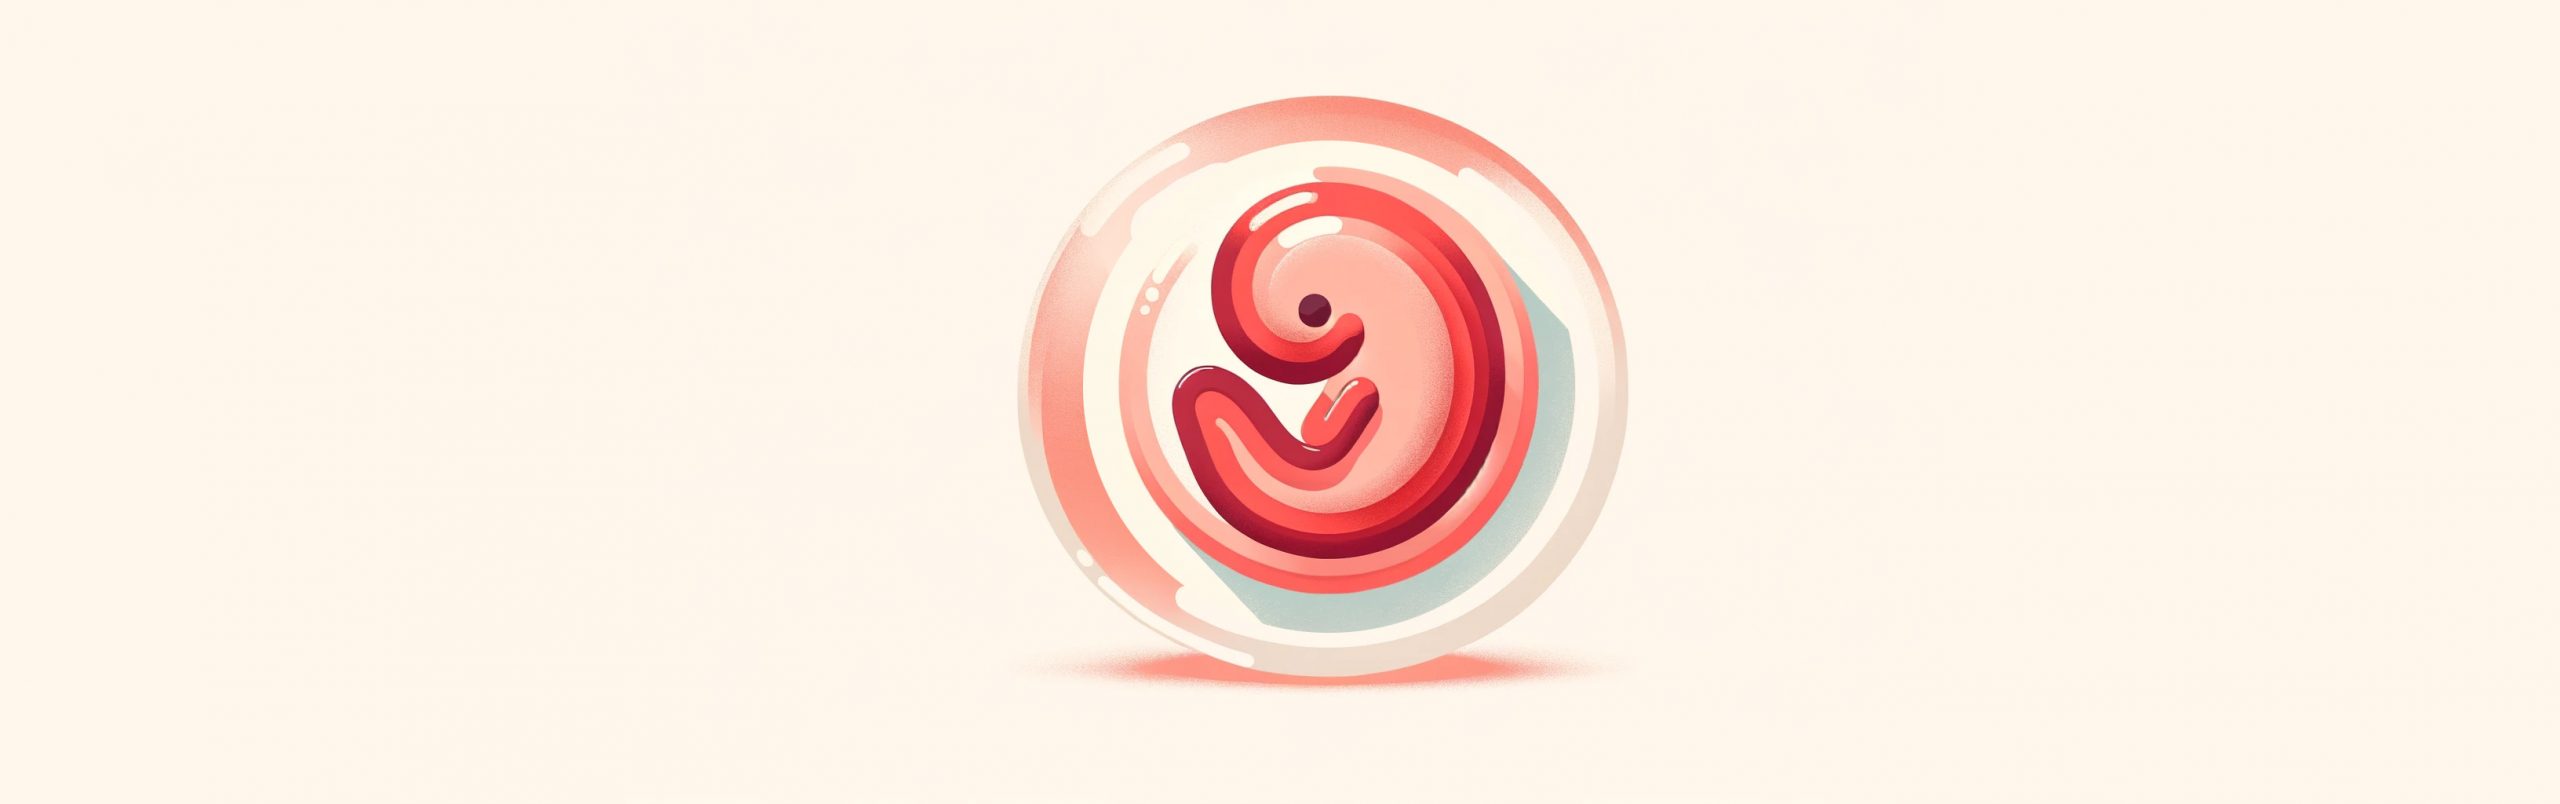 Graphic of Week 7 of pregnancy. An illustration of a baby at week 7 in the gestational sac.